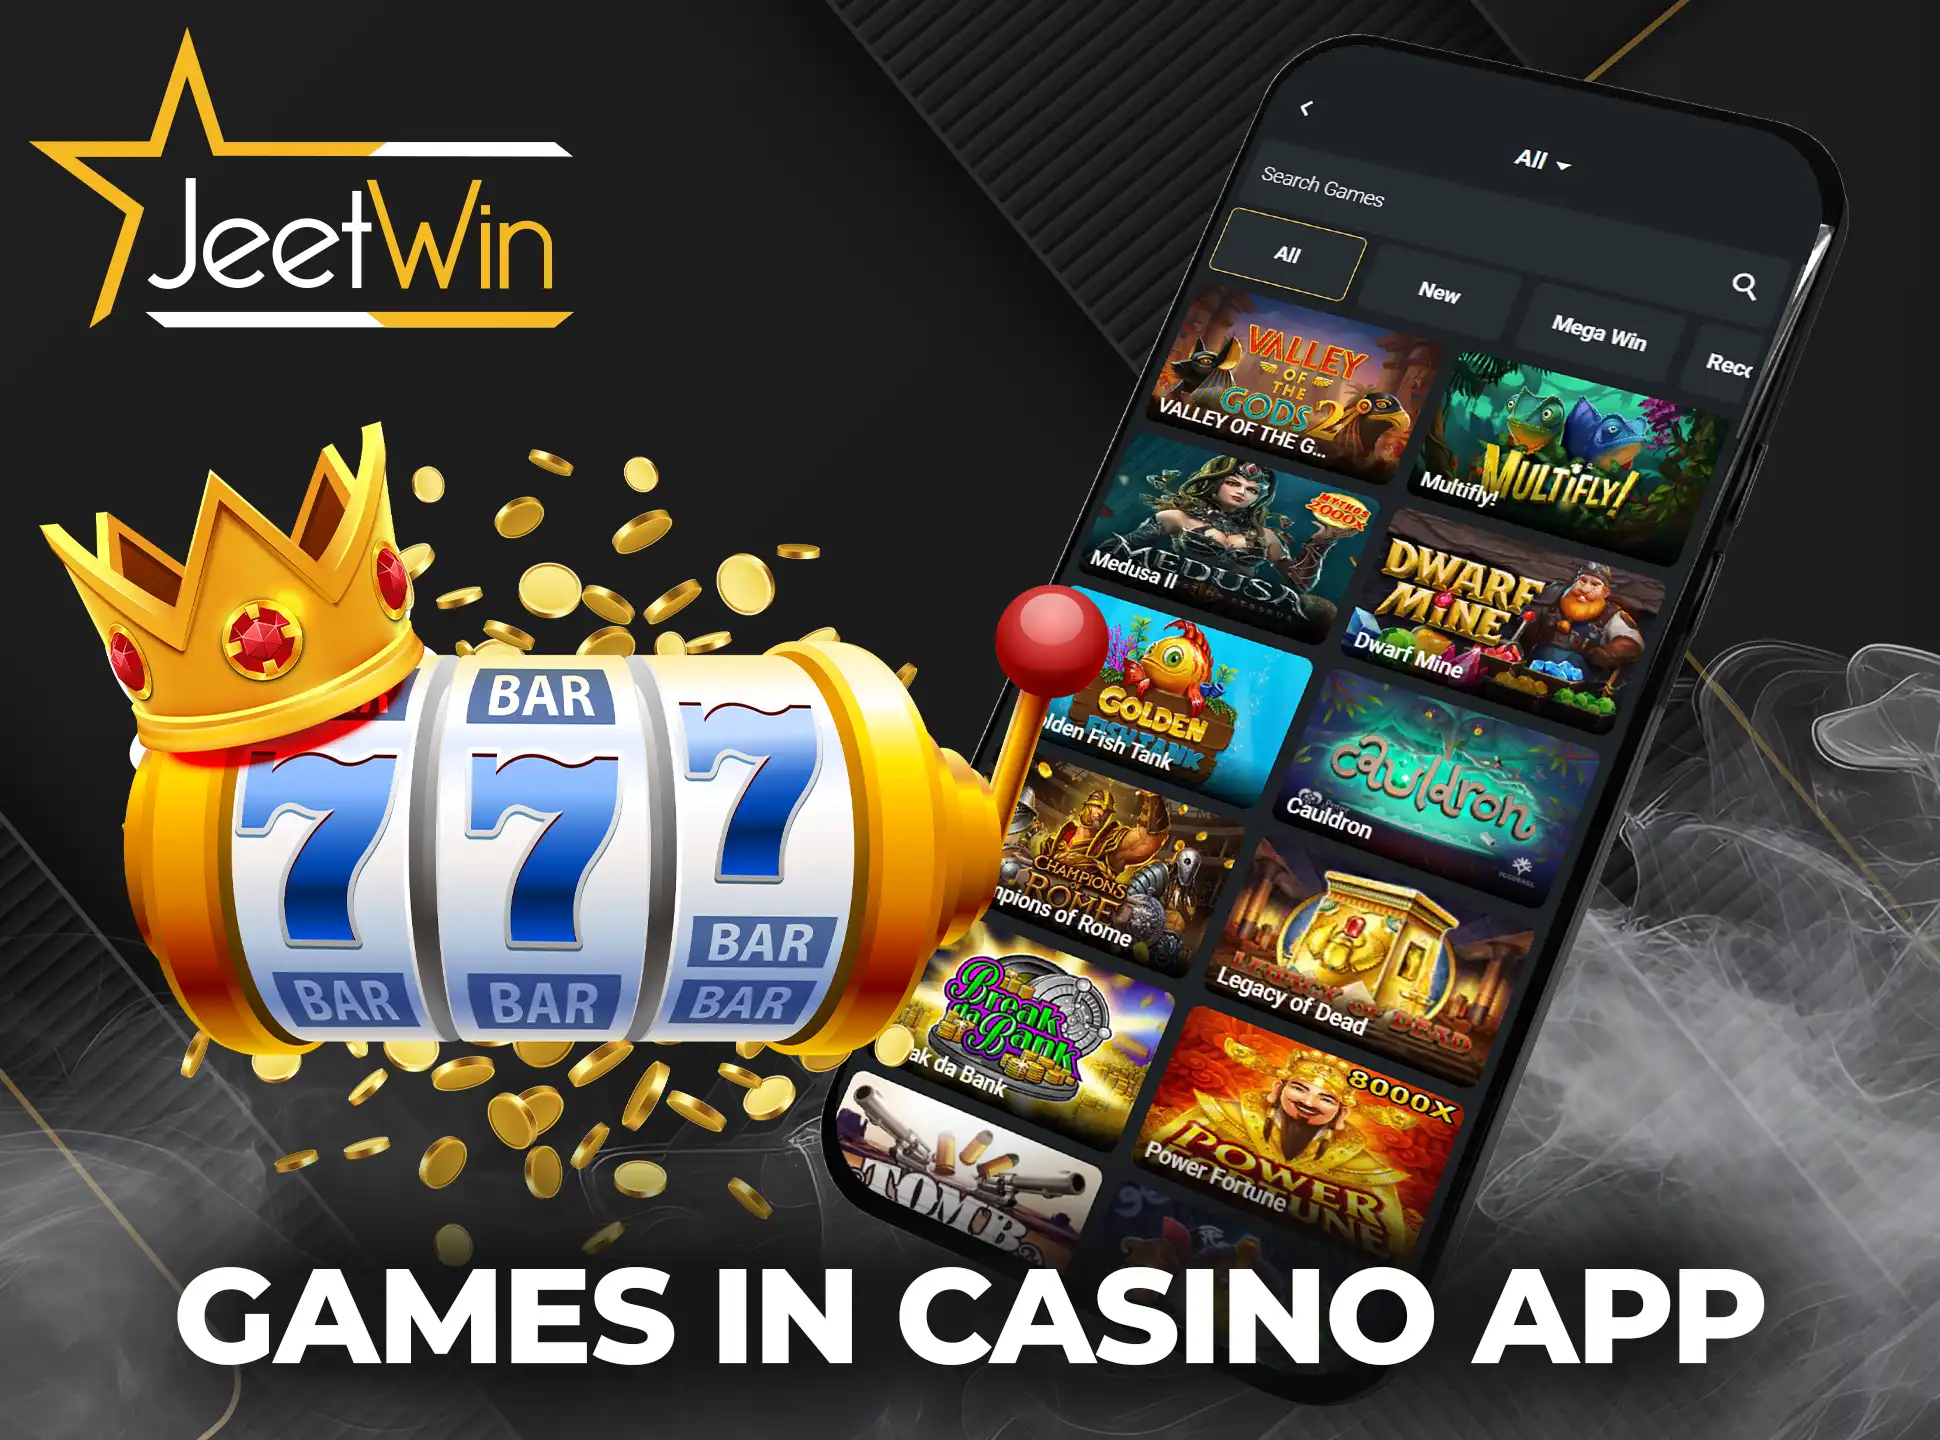 Play your favorite slots and games at JeetWin Casino.